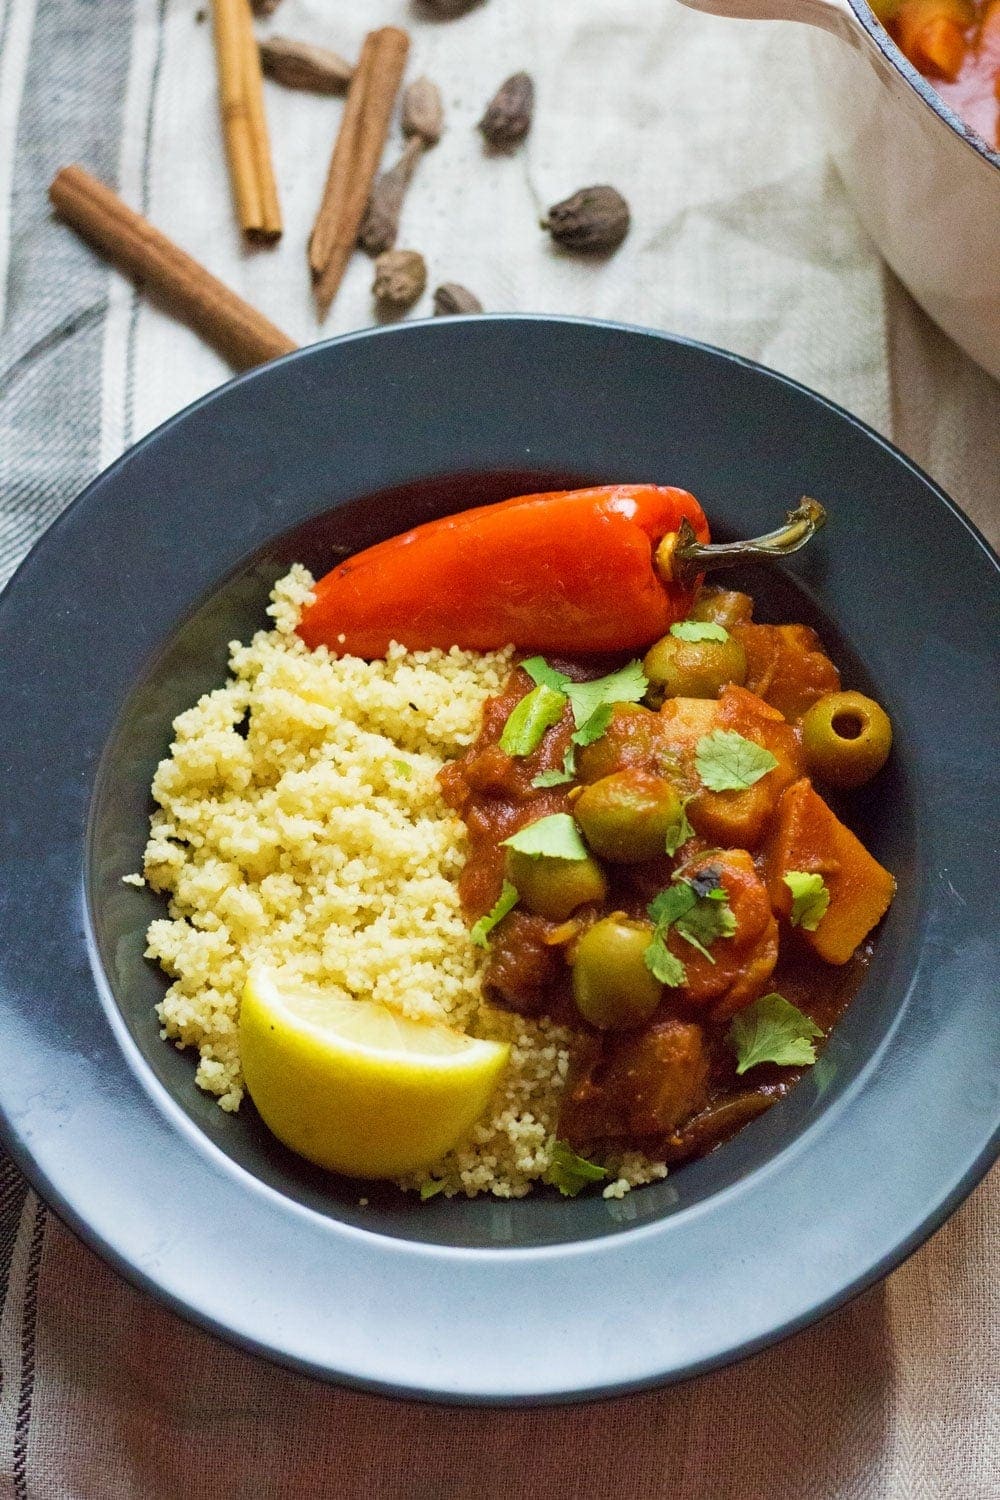 This squash & aubergine tagine is a delicious vegetarian dinner. Bursting with Moroccan flavour this tagine is healthy and suitable for vegans!